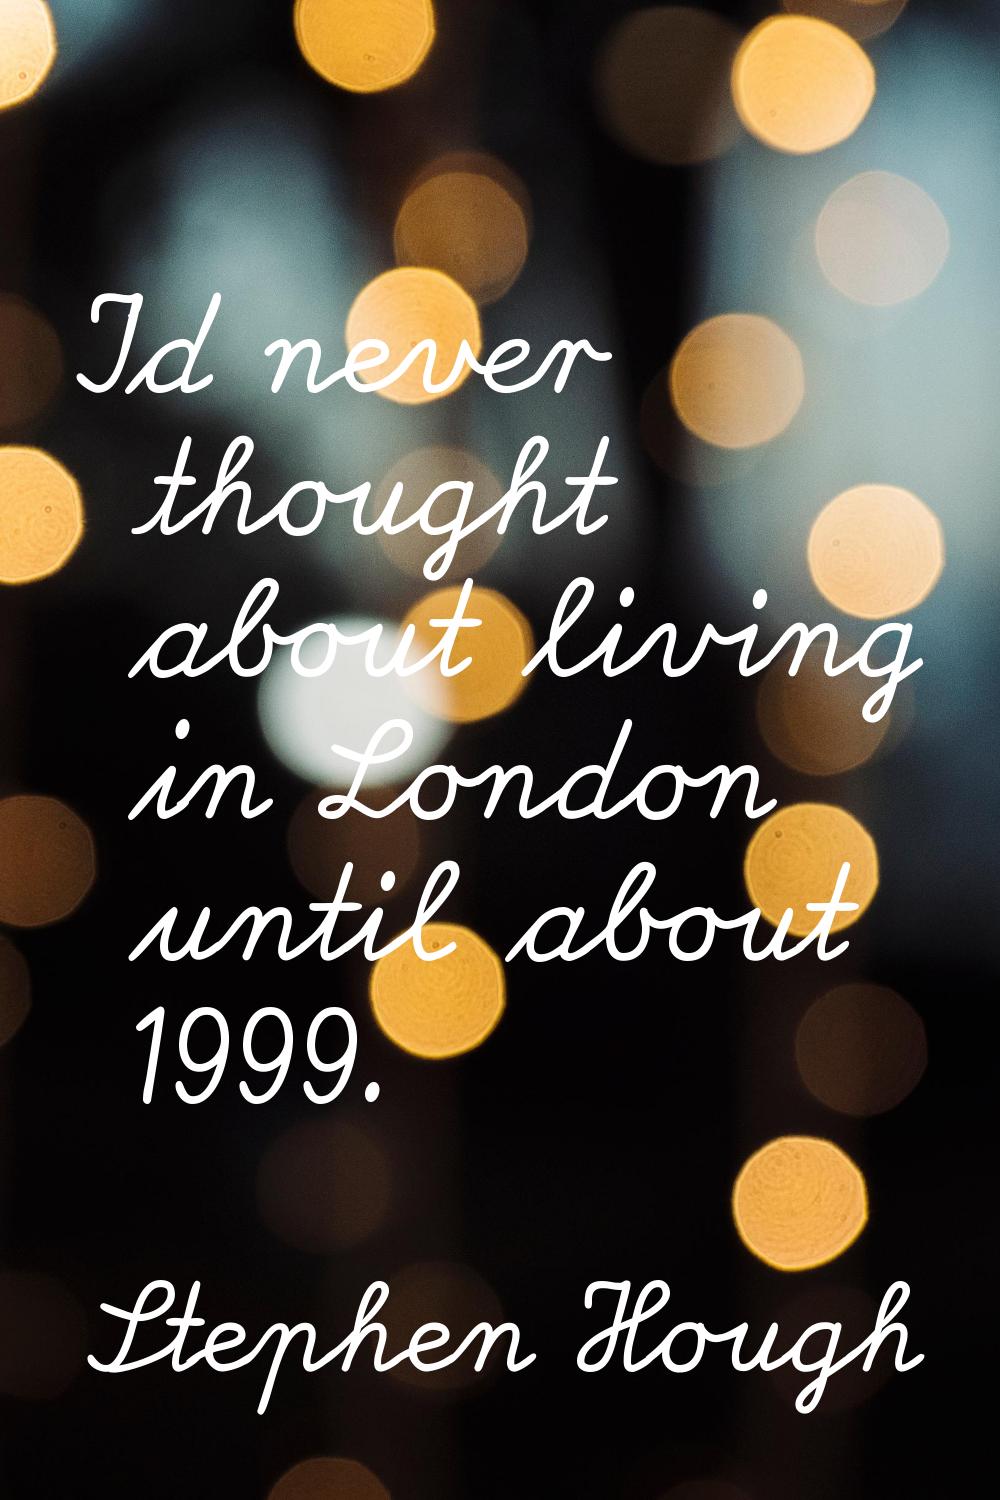 I'd never thought about living in London until about 1999.